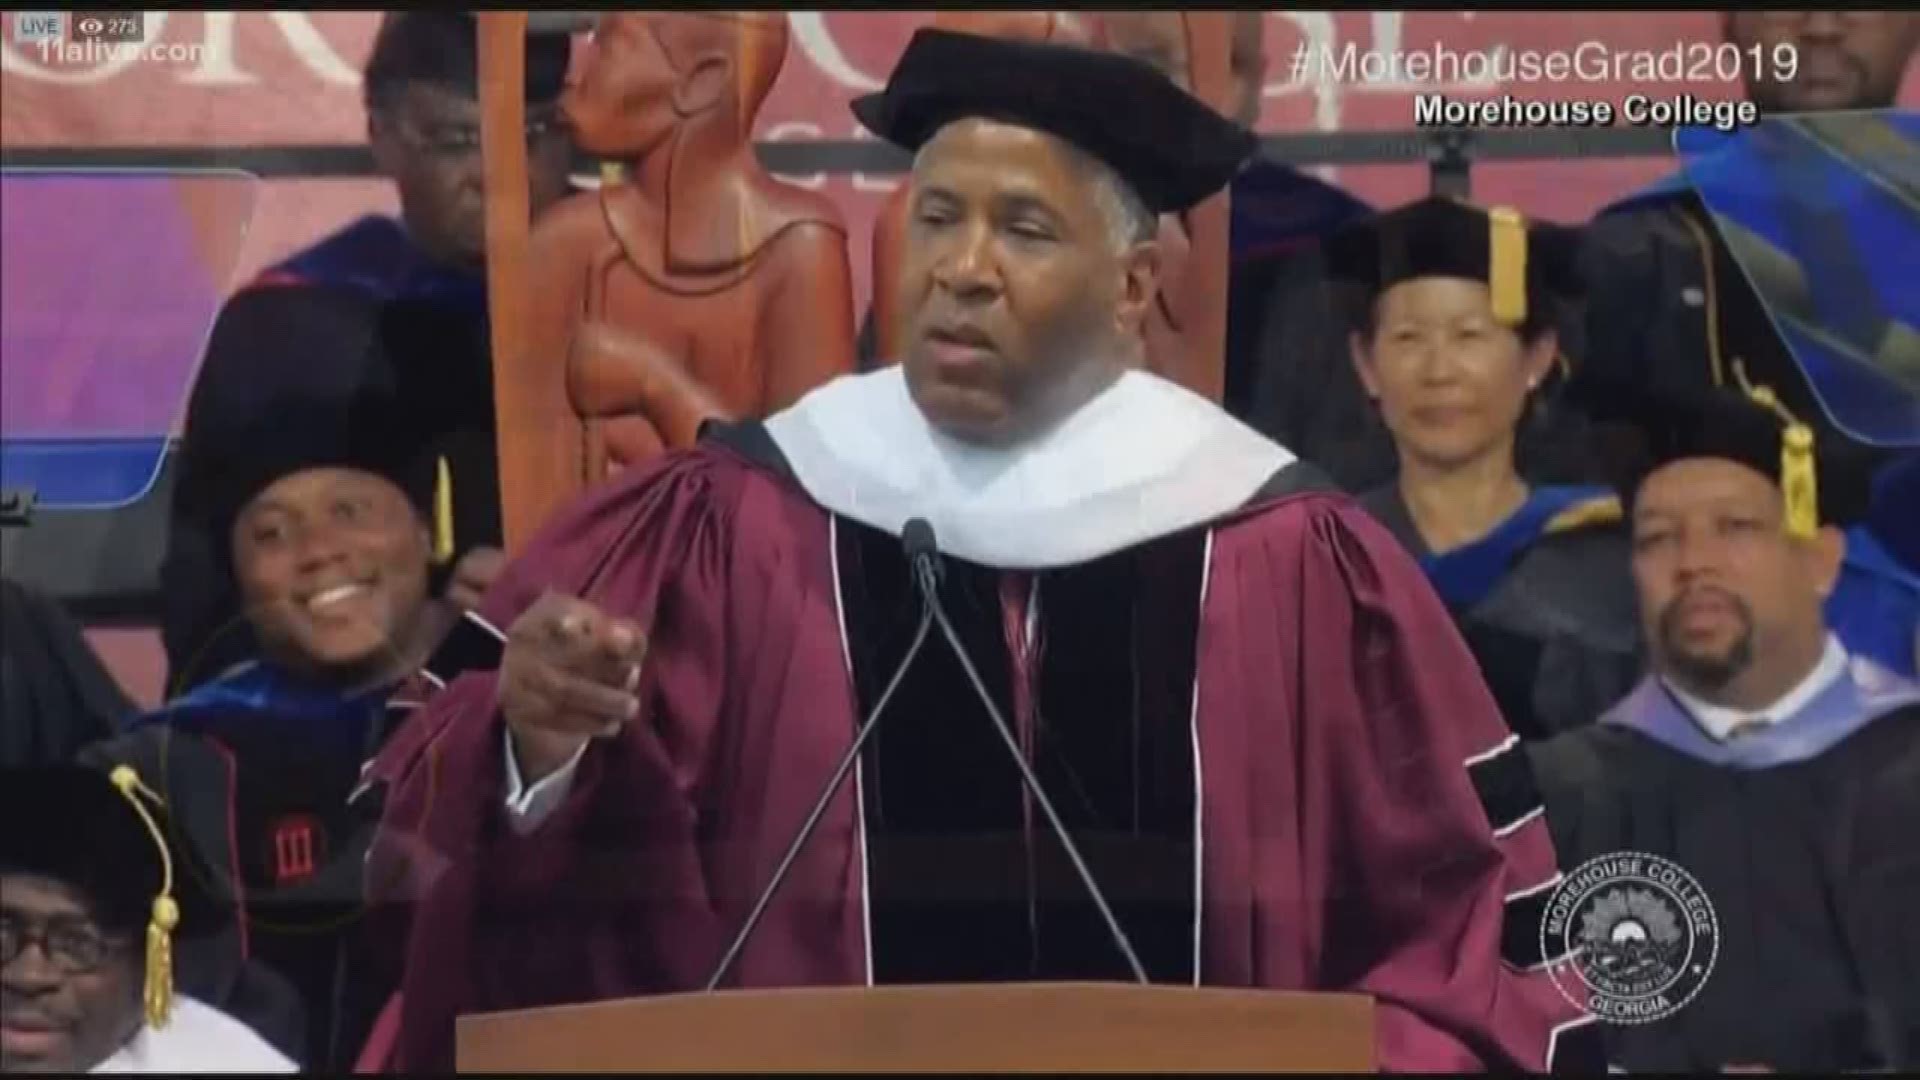 Billionaire philanthropist Robert Smith promised last spring to pay off all of the college debt of the Morehouse graduating class of 2019.